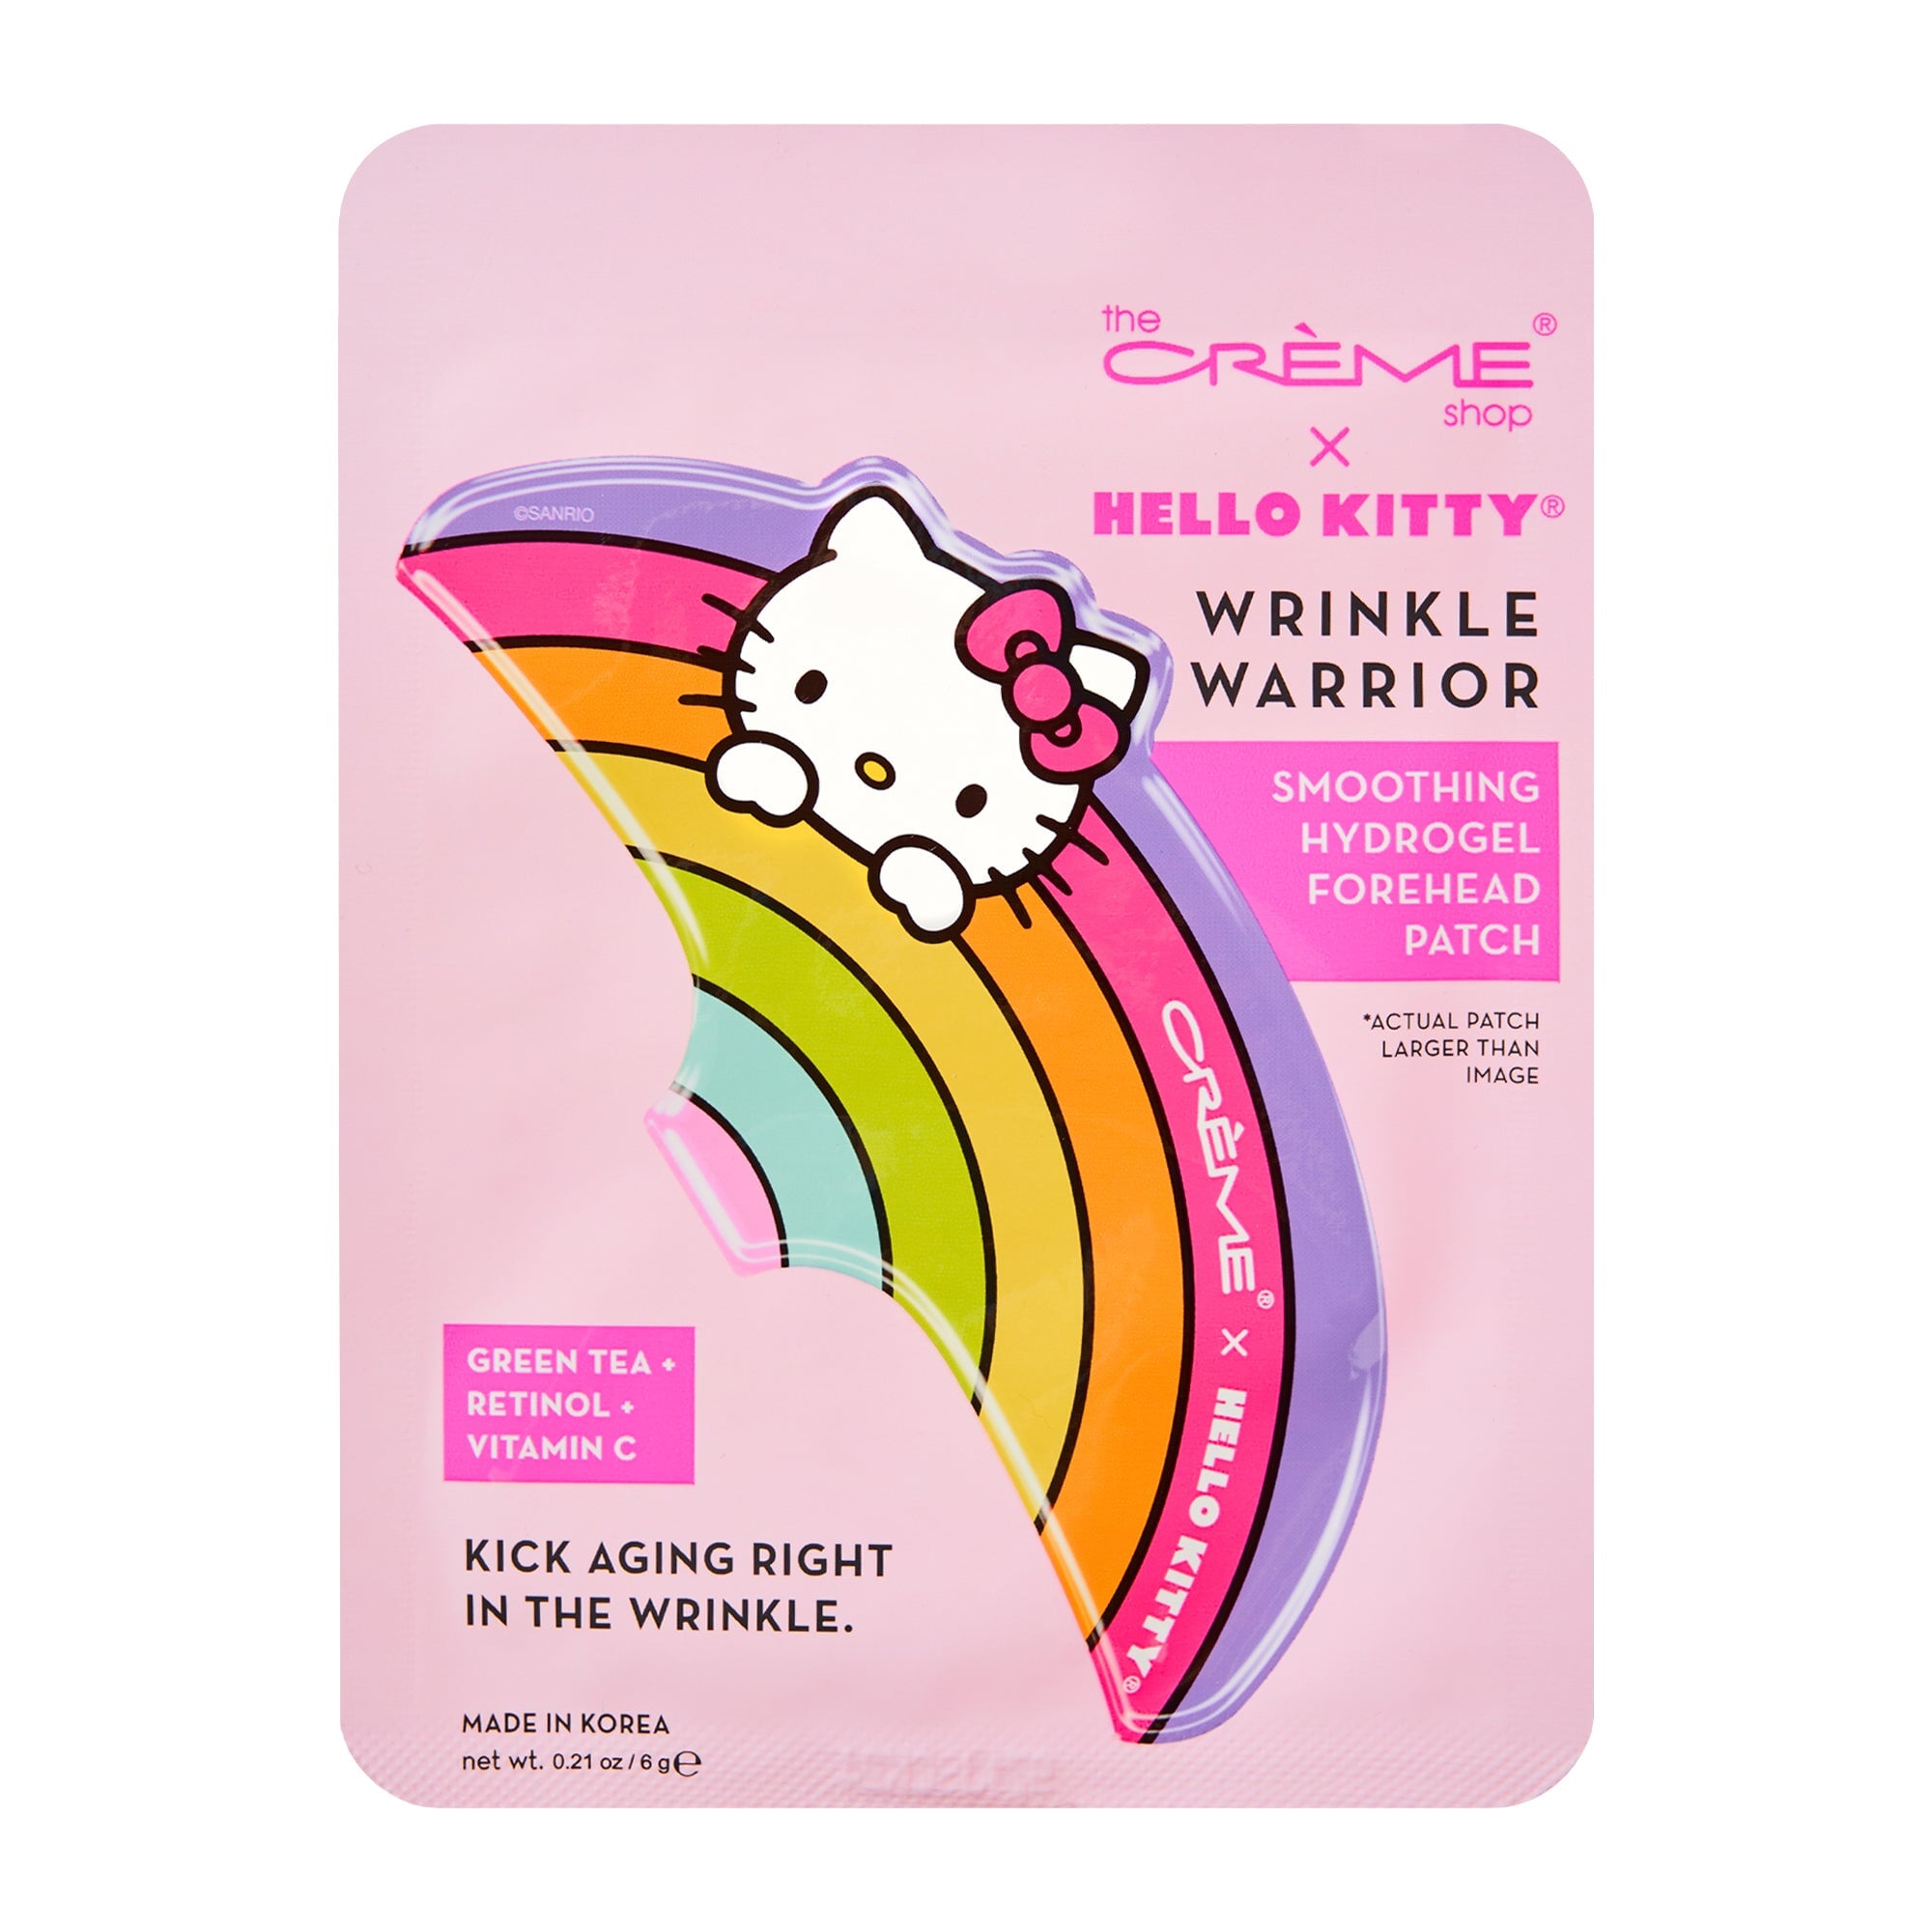 Hello Kitty Wrinkle Warrior Smoothing Hydrogel Forehead Patch Forehead Patches The Crème Shop x Sanrio 